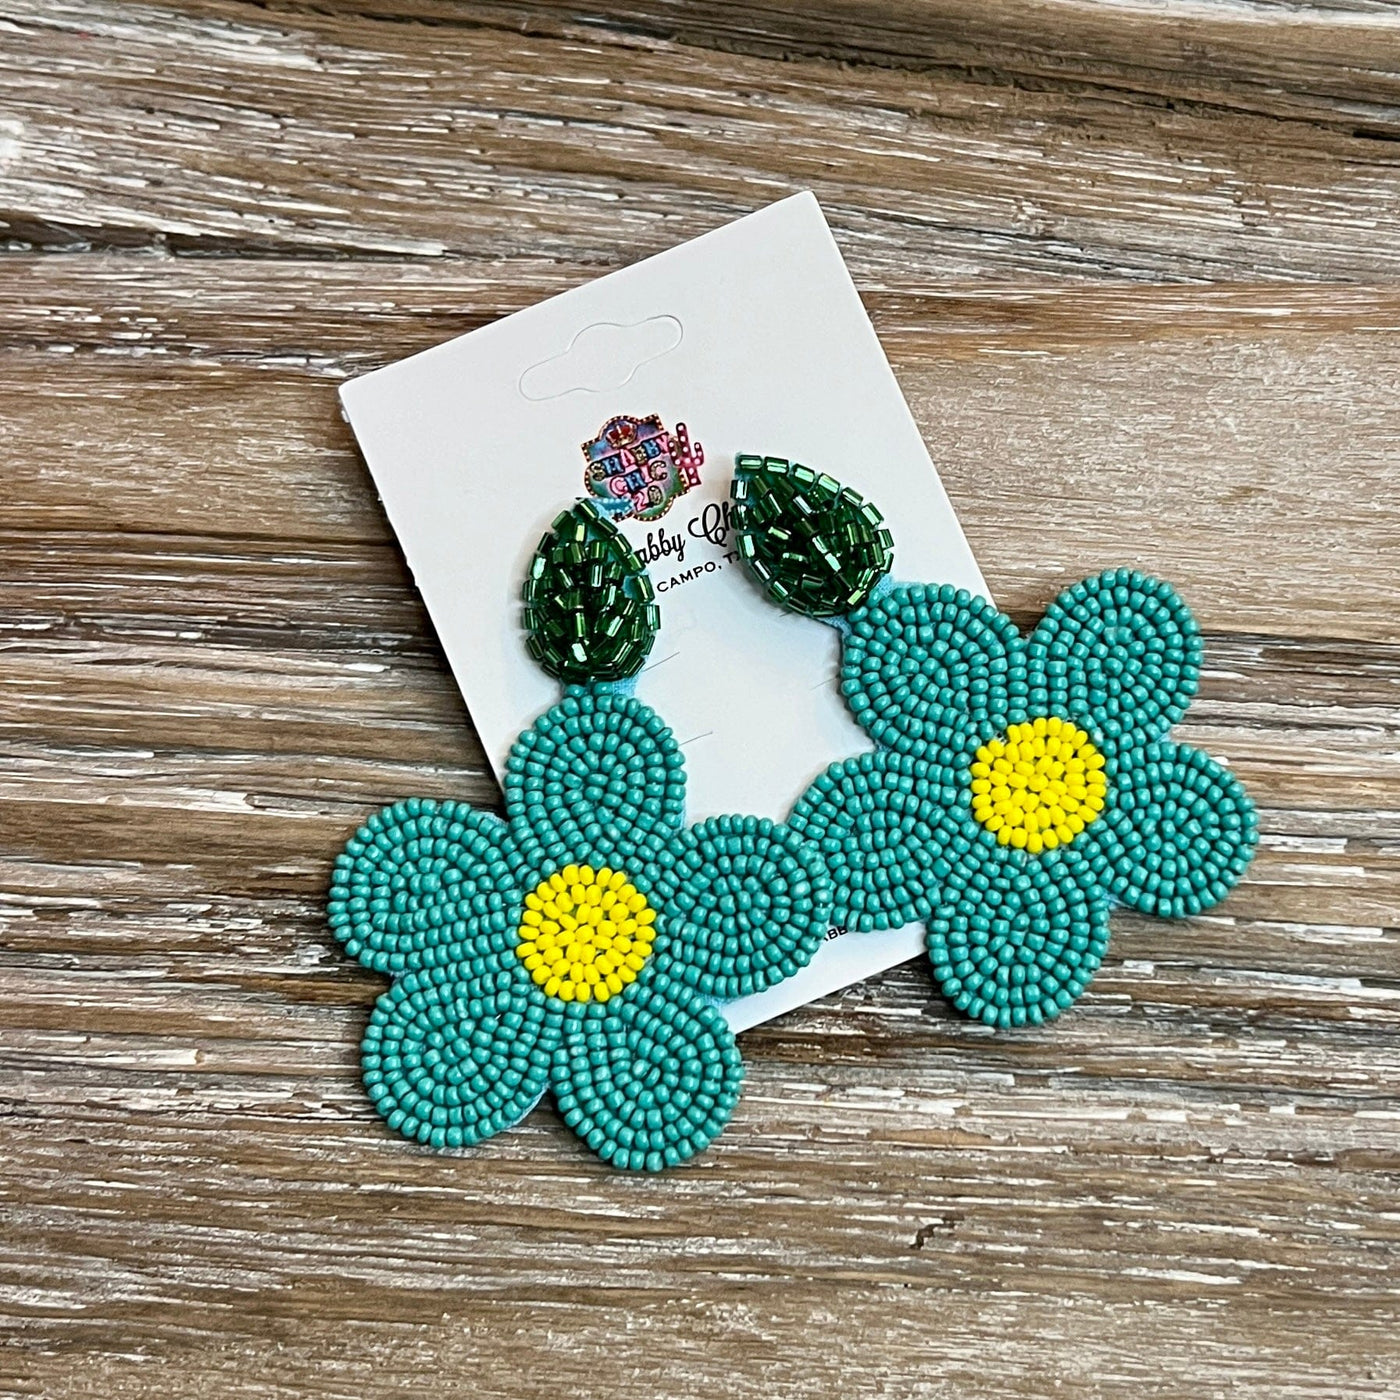 Daisy Earrings Shabby Chic Boutique and Tanning Salon Turquoise